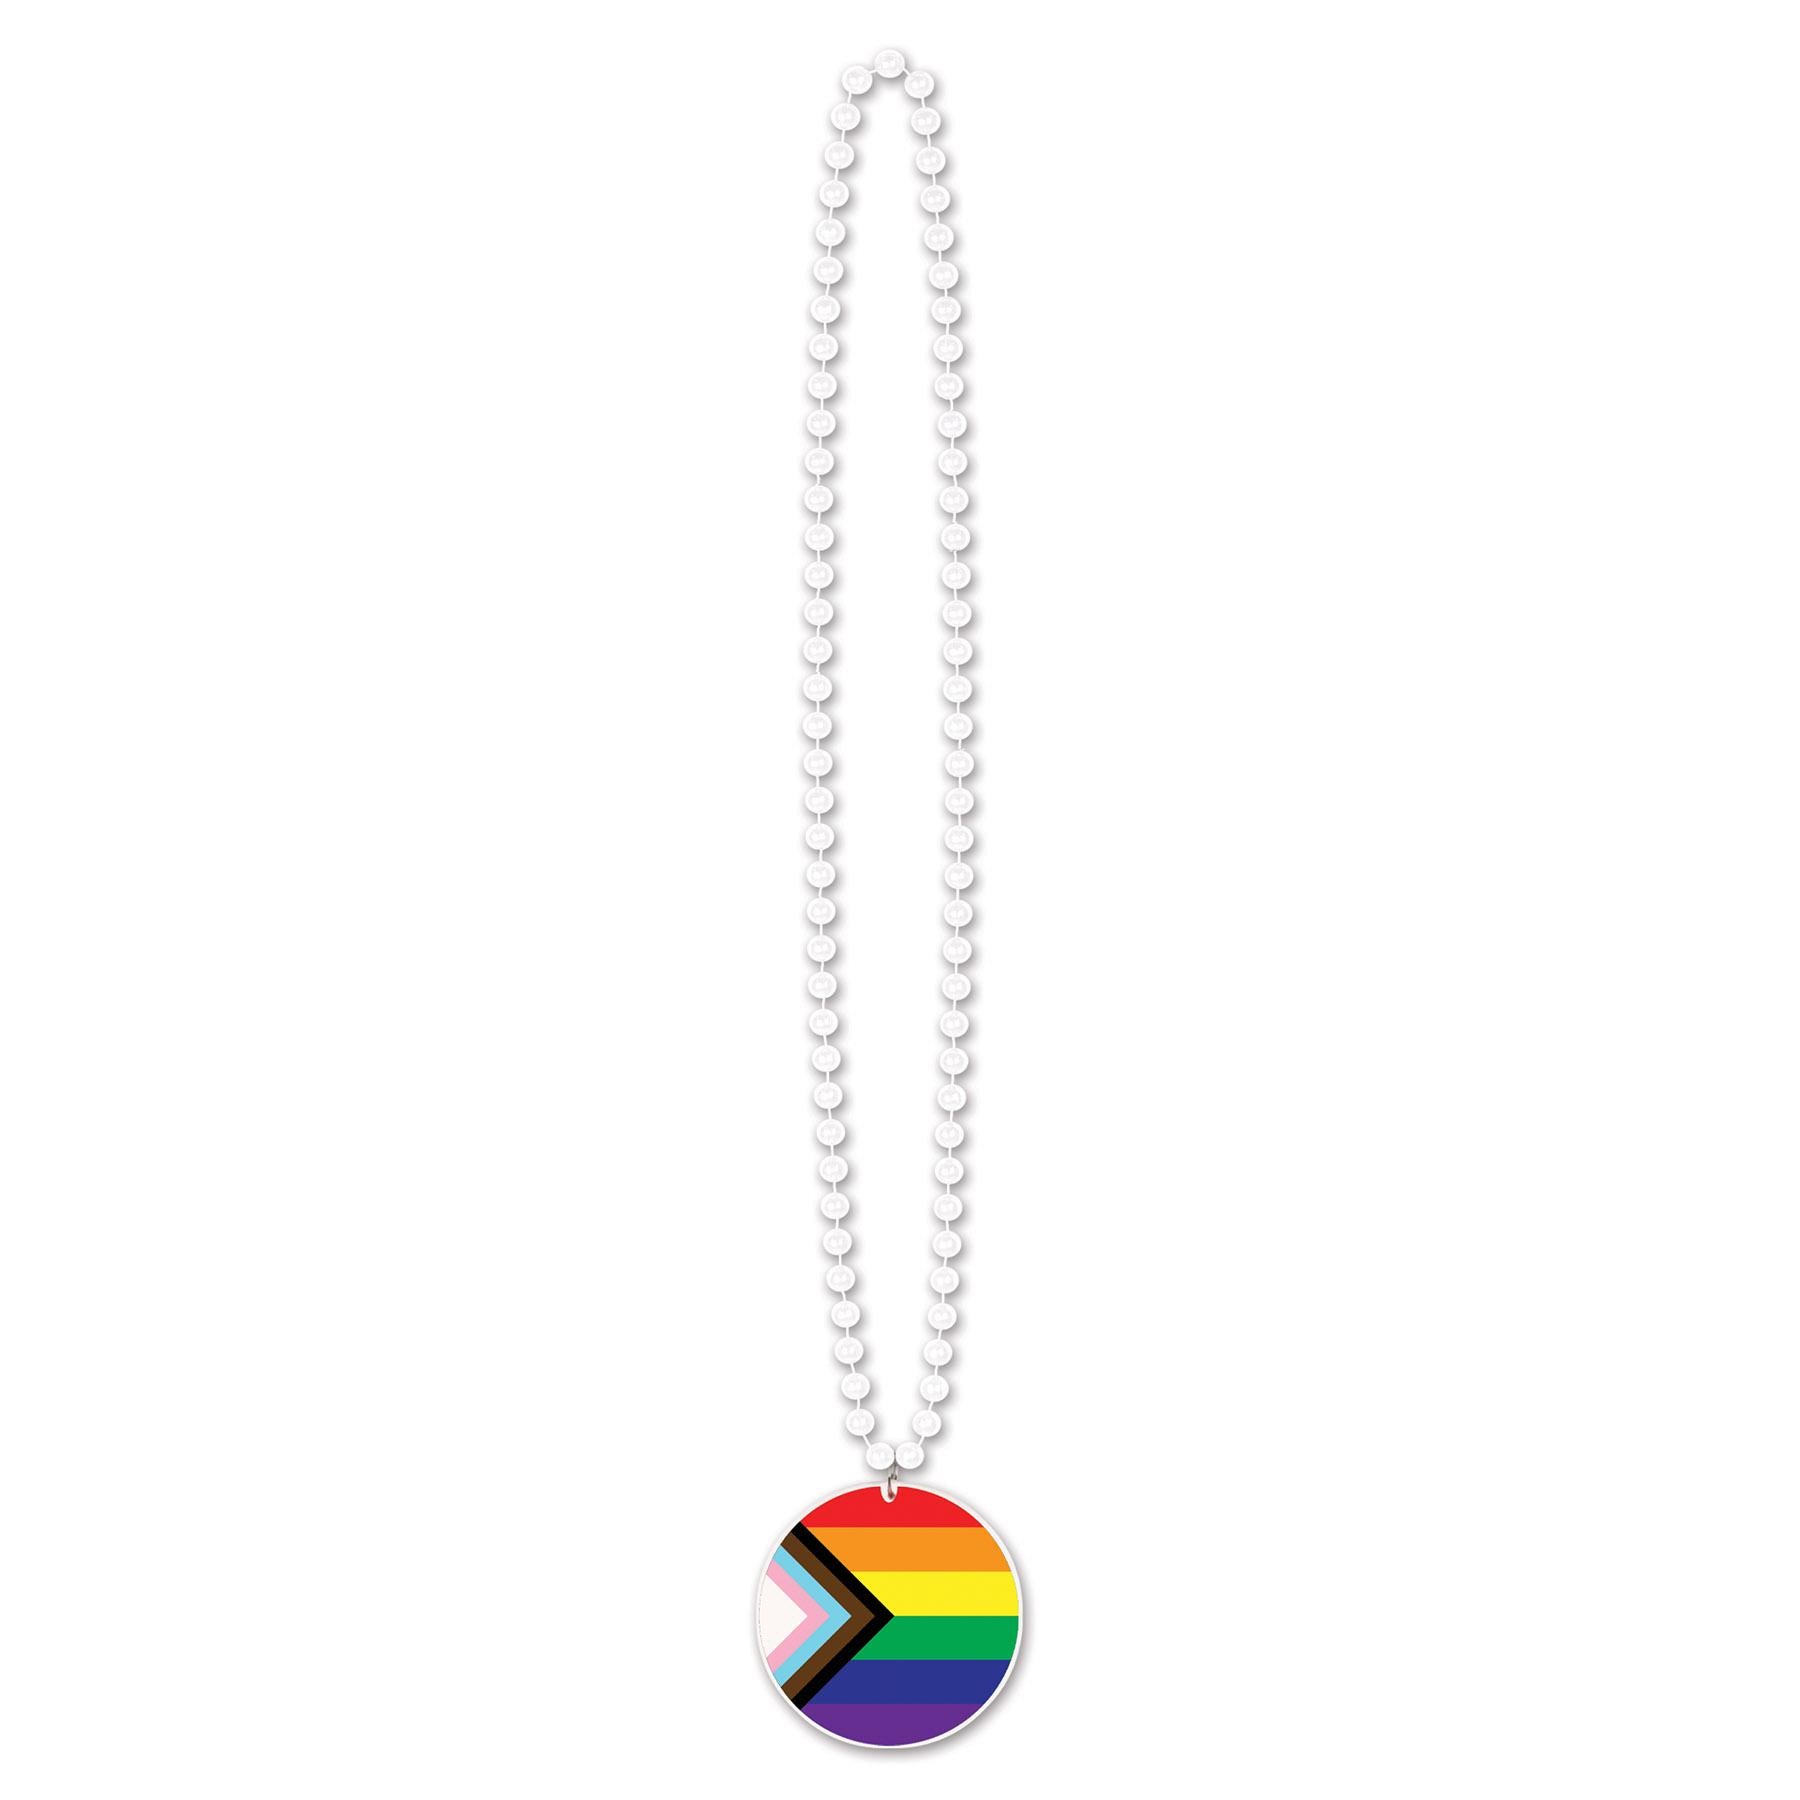 Bead Necklace with Printed Pride Flag Medallion